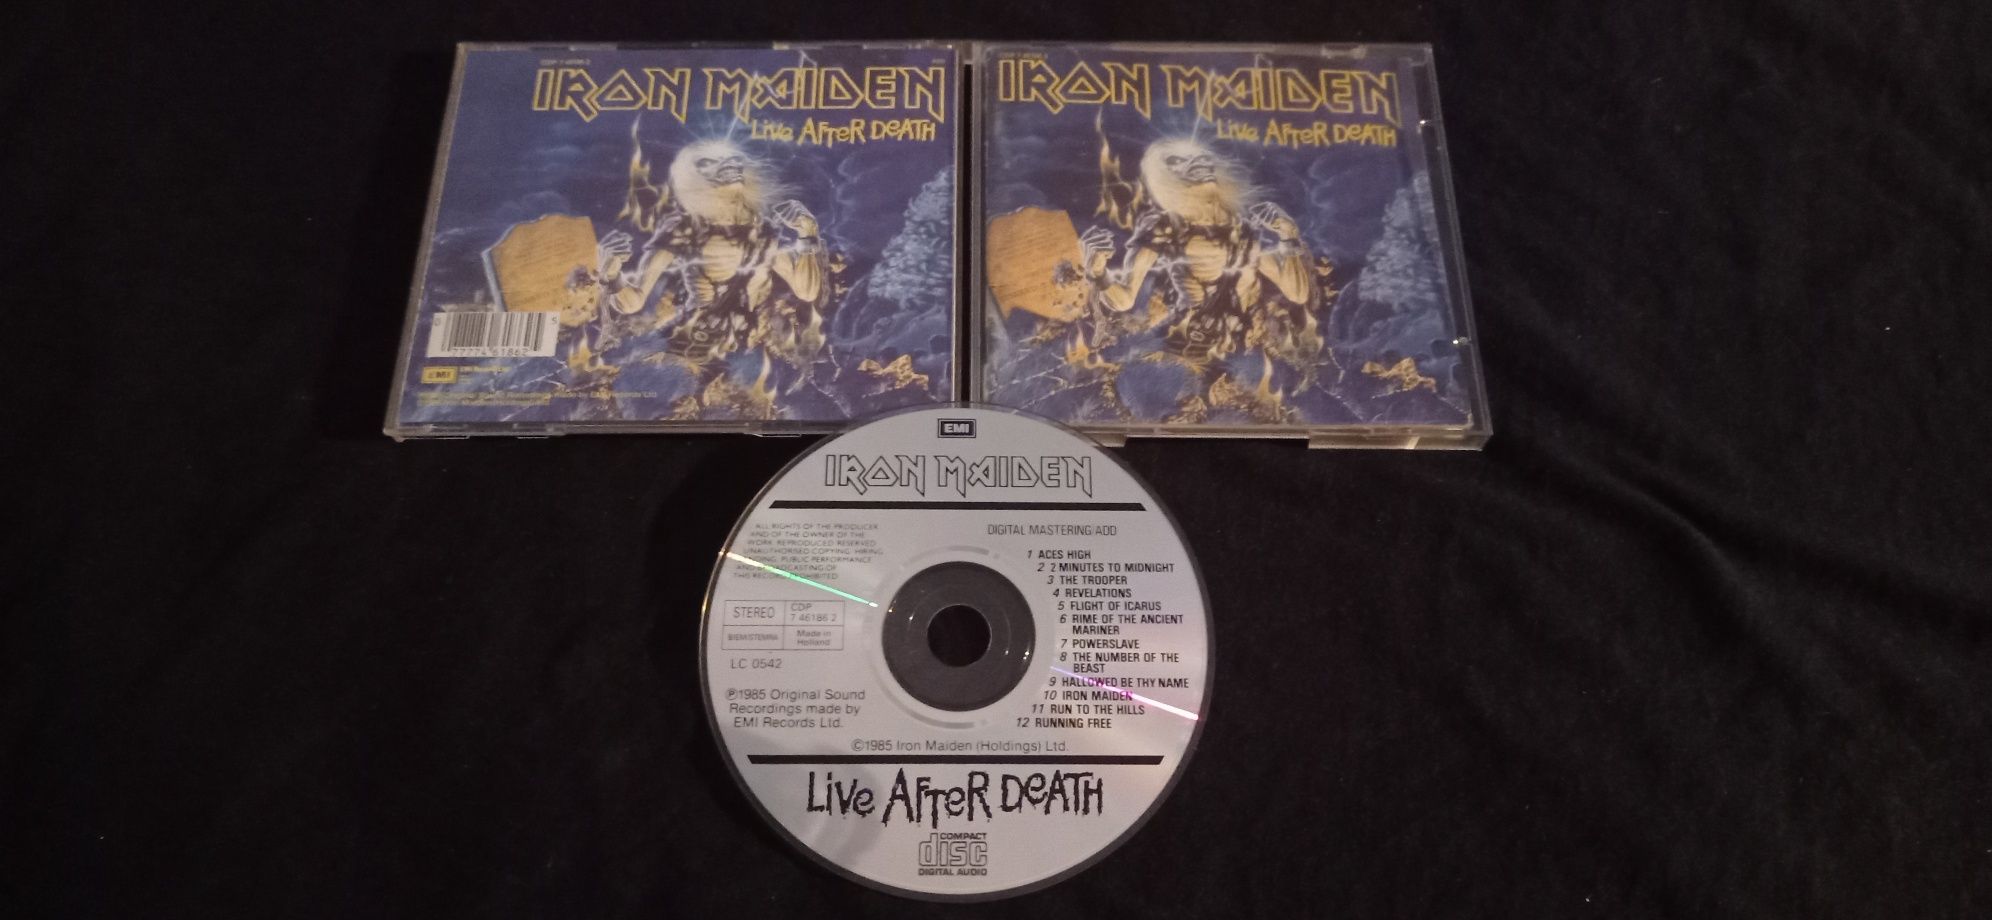 Iron Maiden - Live After Death CD